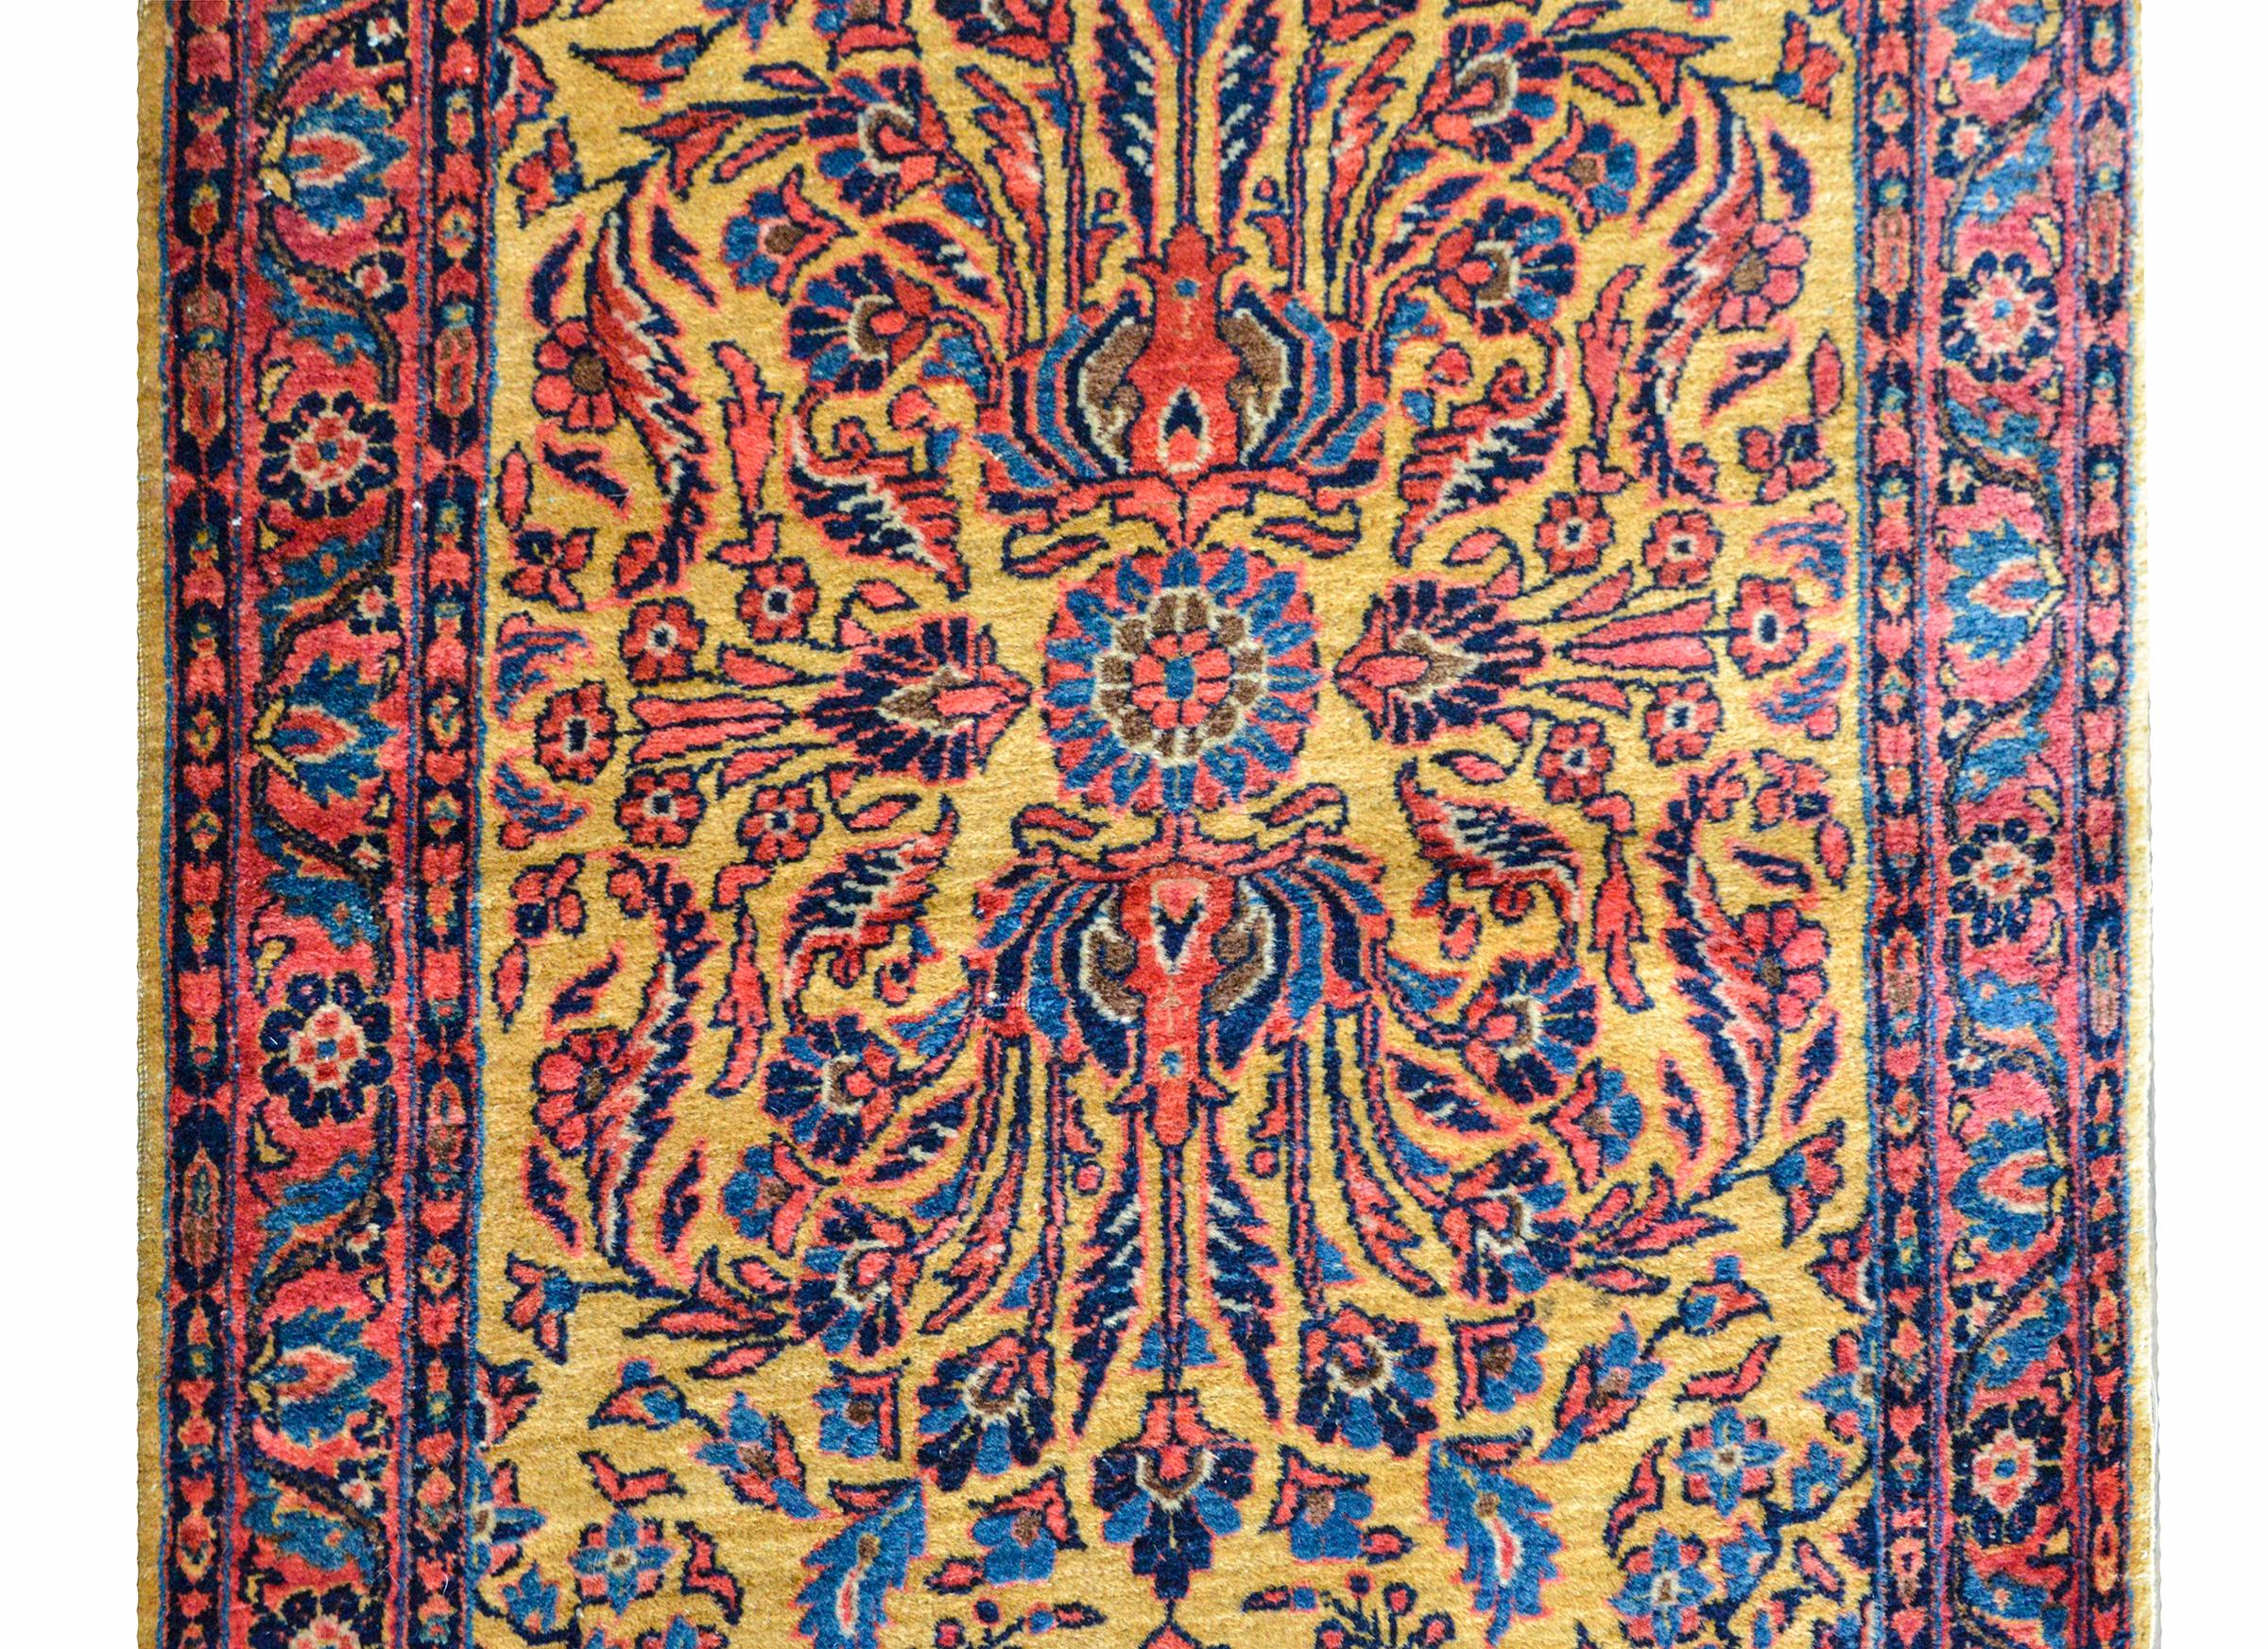 A beautiful early 20th century Persian Kashan runner with a fantastic large-scale floral pattern with scrolling leaves, flowers, and vines, all woven in light and dark indigo and pink against a rich gold background, and surrounded by a wide floral